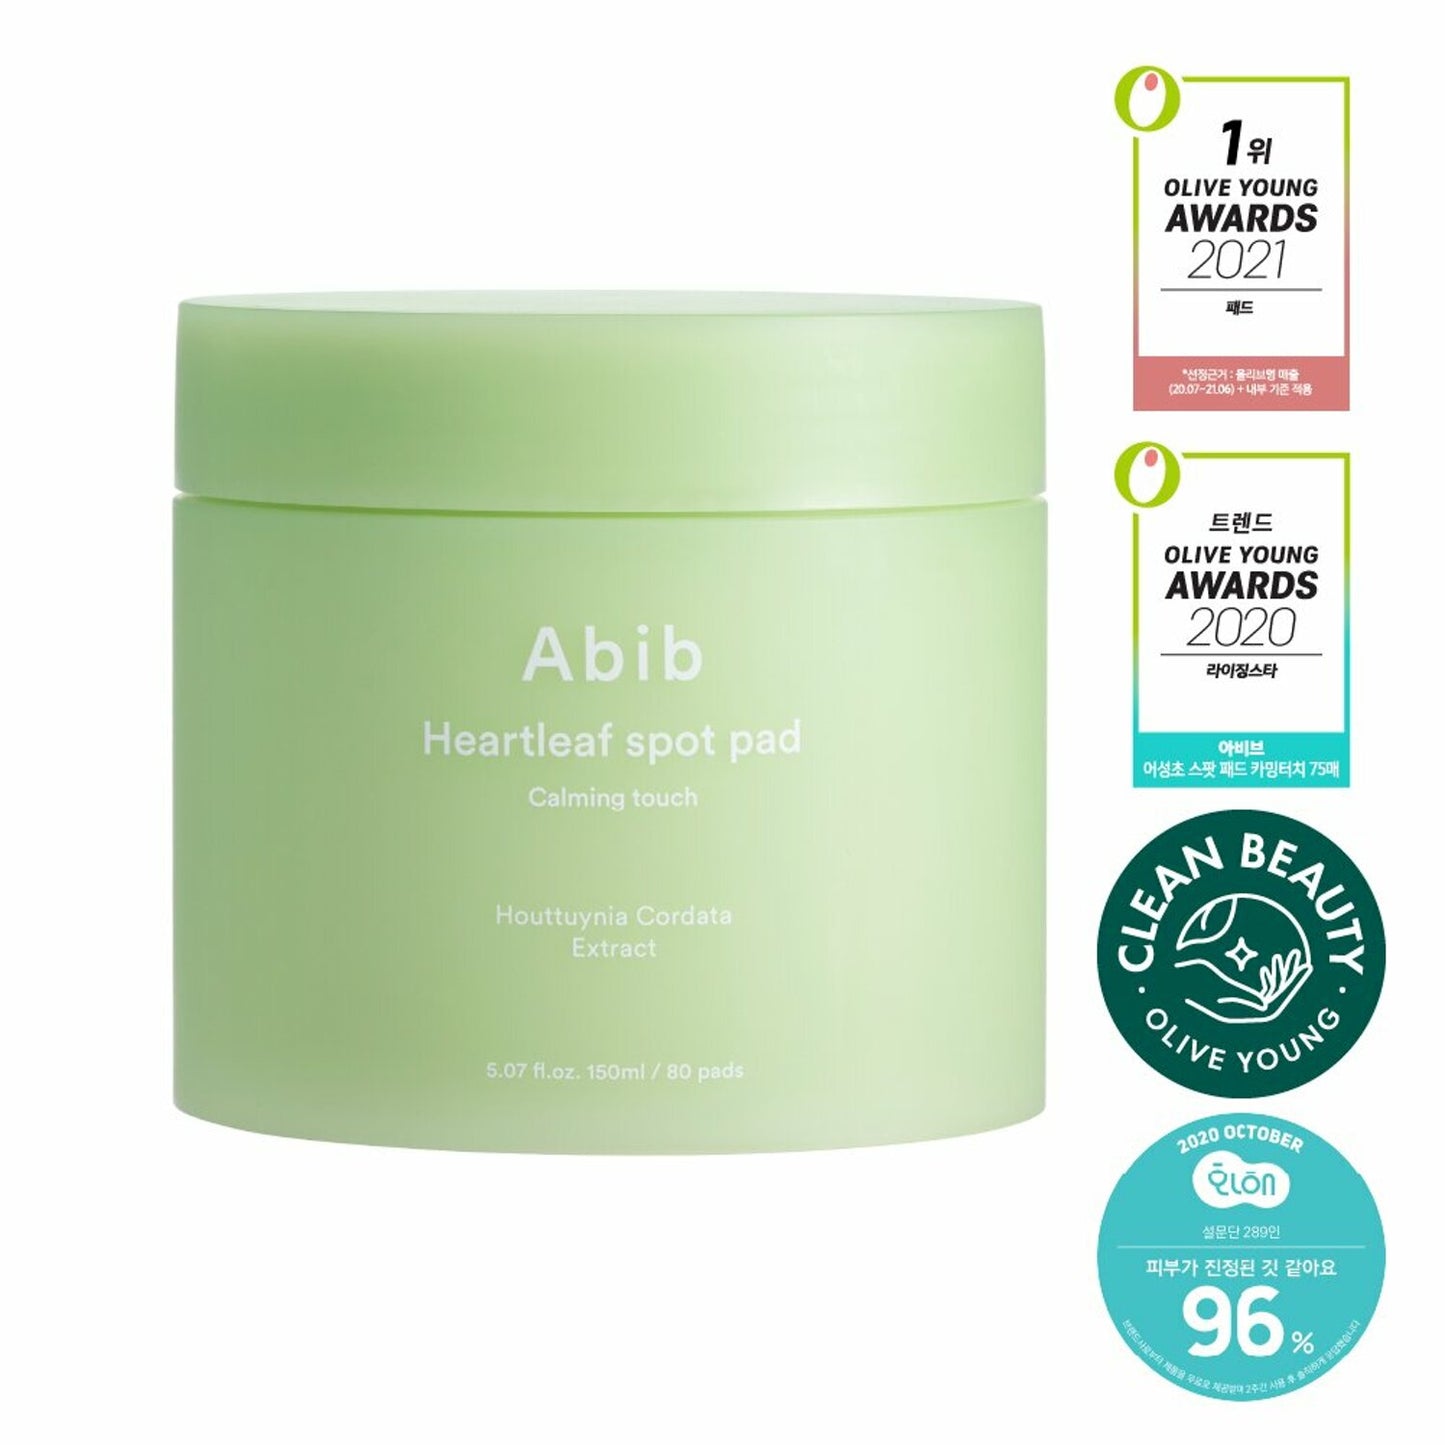 Abib Heartleaf Spot Pad Calming Touch 80 Pads (+80 pad)